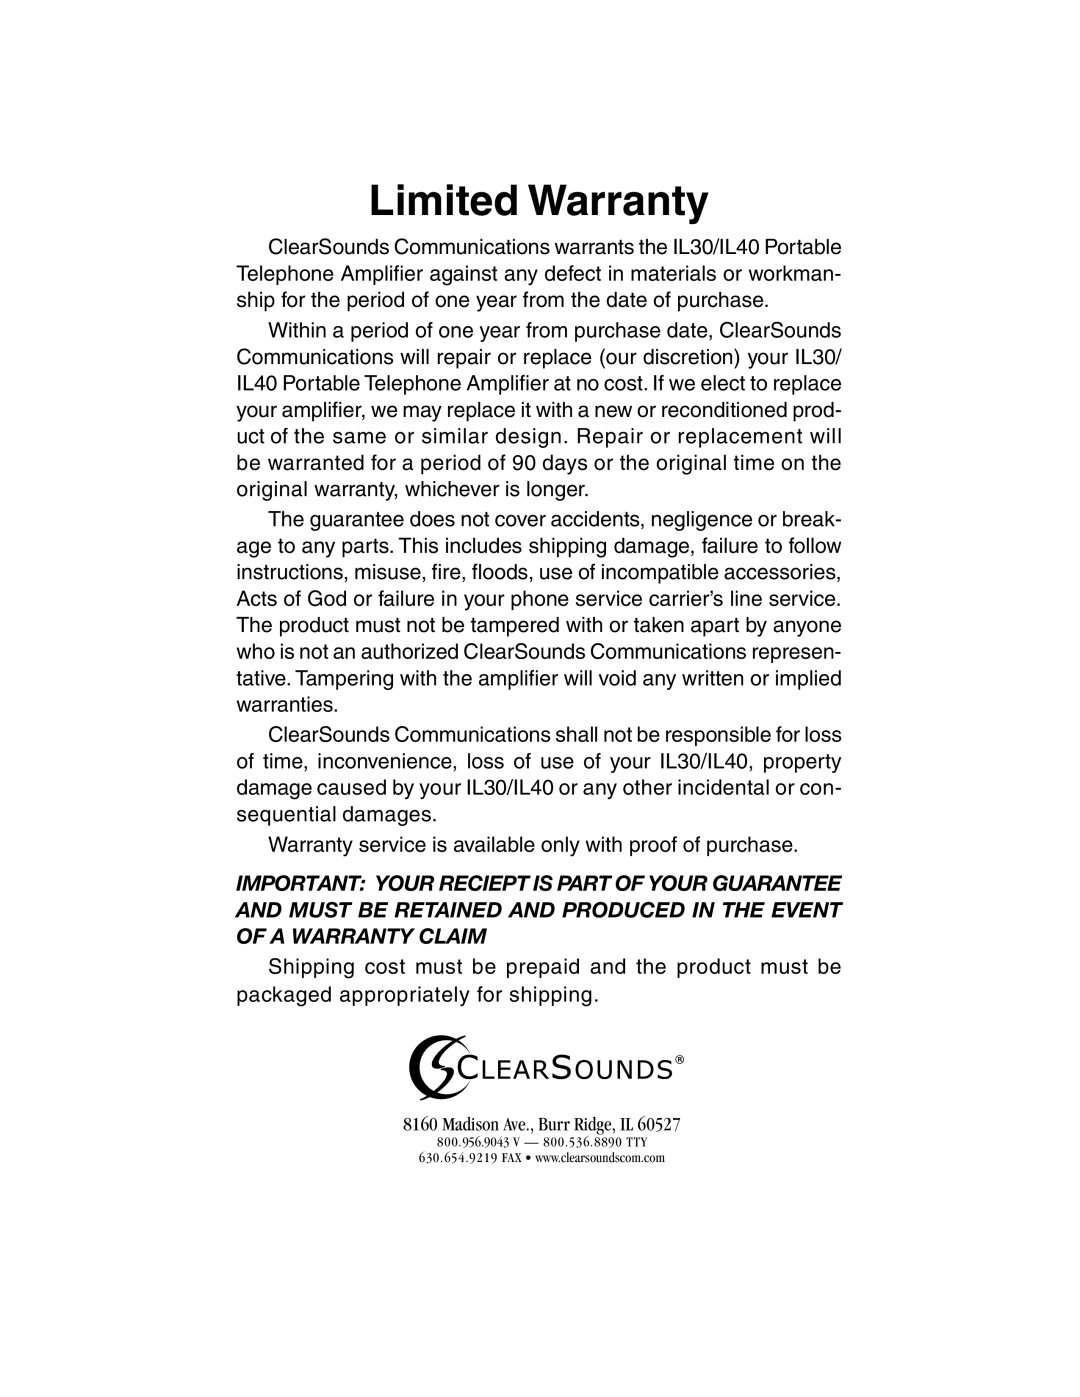 ClearSounds Portable Telephone Amplifier manual Limited Warranty 